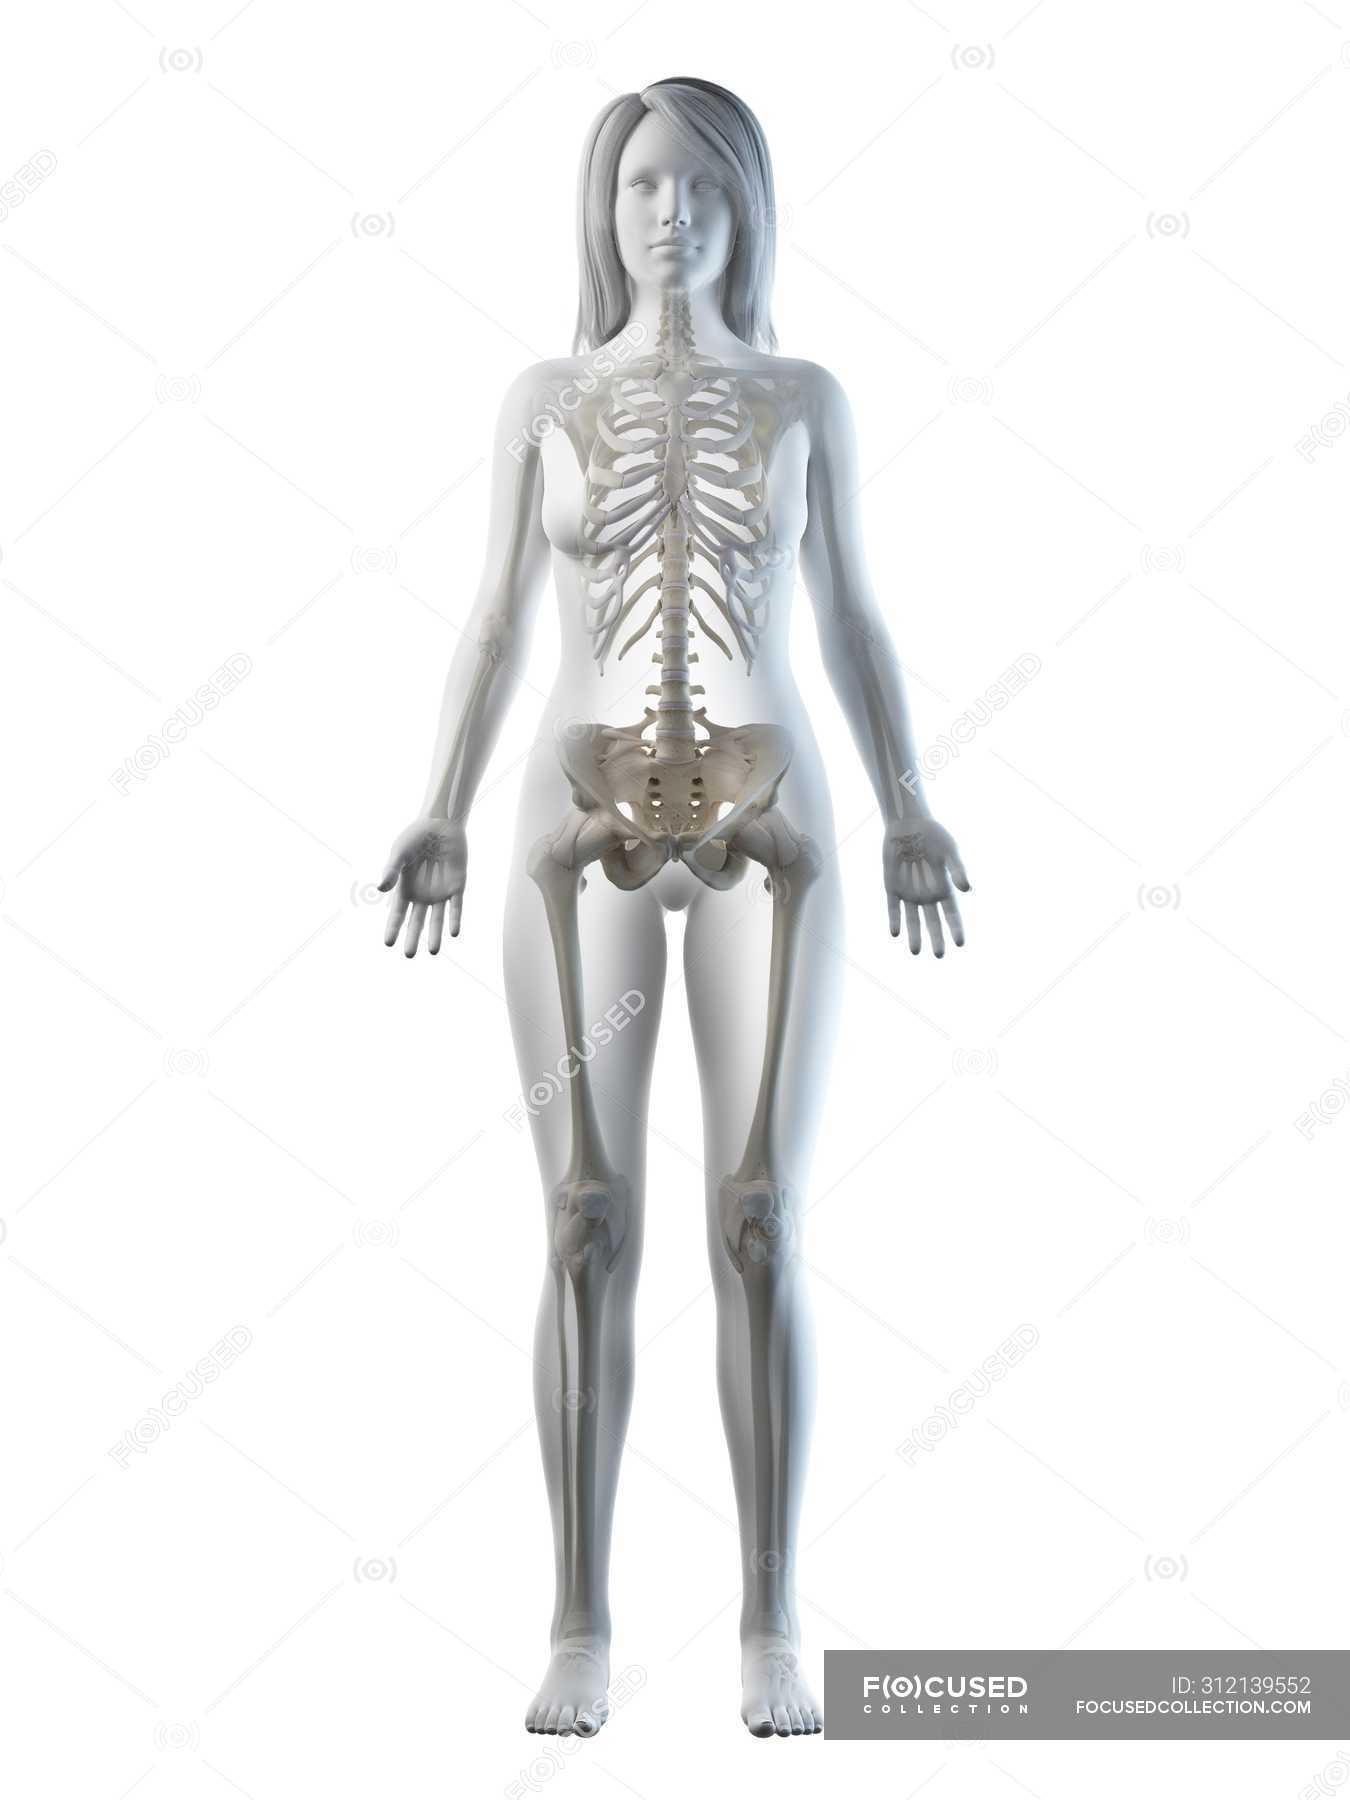 Visible skeleton in female body silhouette in front view, computer